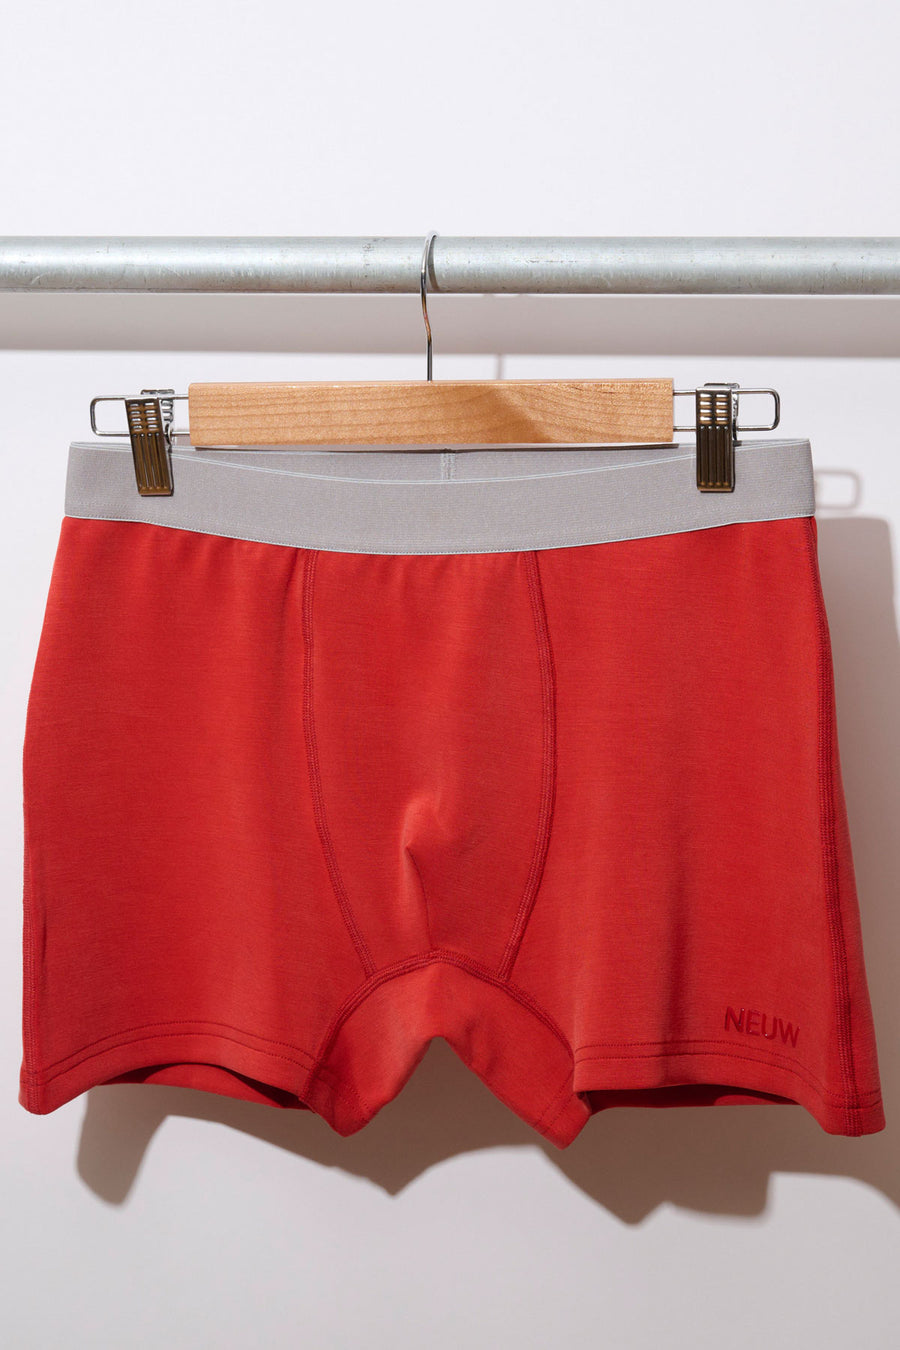 Active wear BOXER（Punch）CRIMSON RED [New Color]